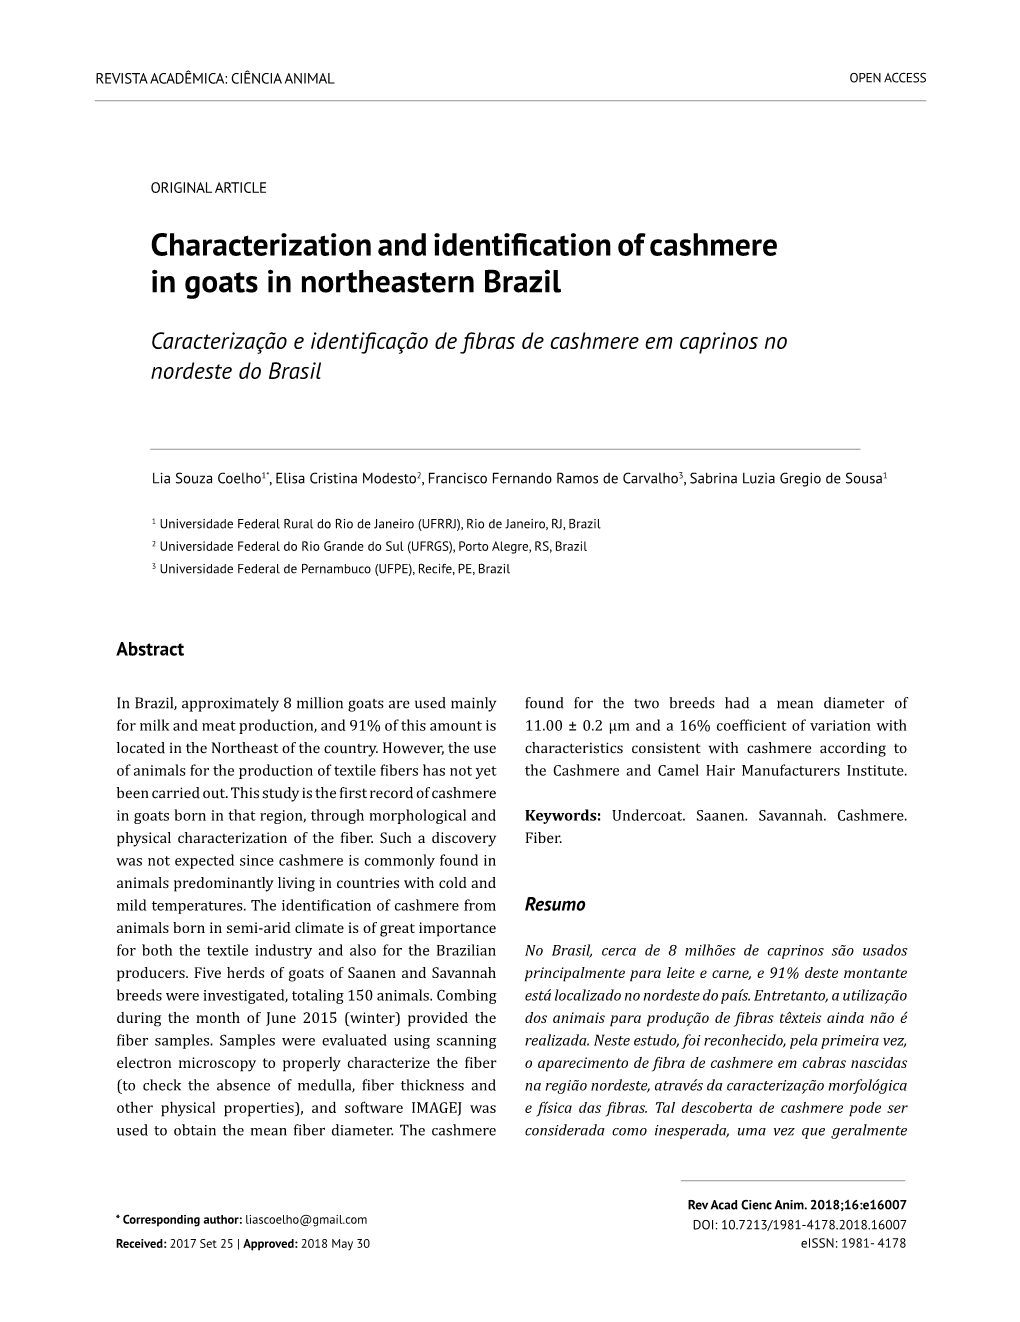 Characterization and Identification of Cashmere in Goats in Northeastern Brazil